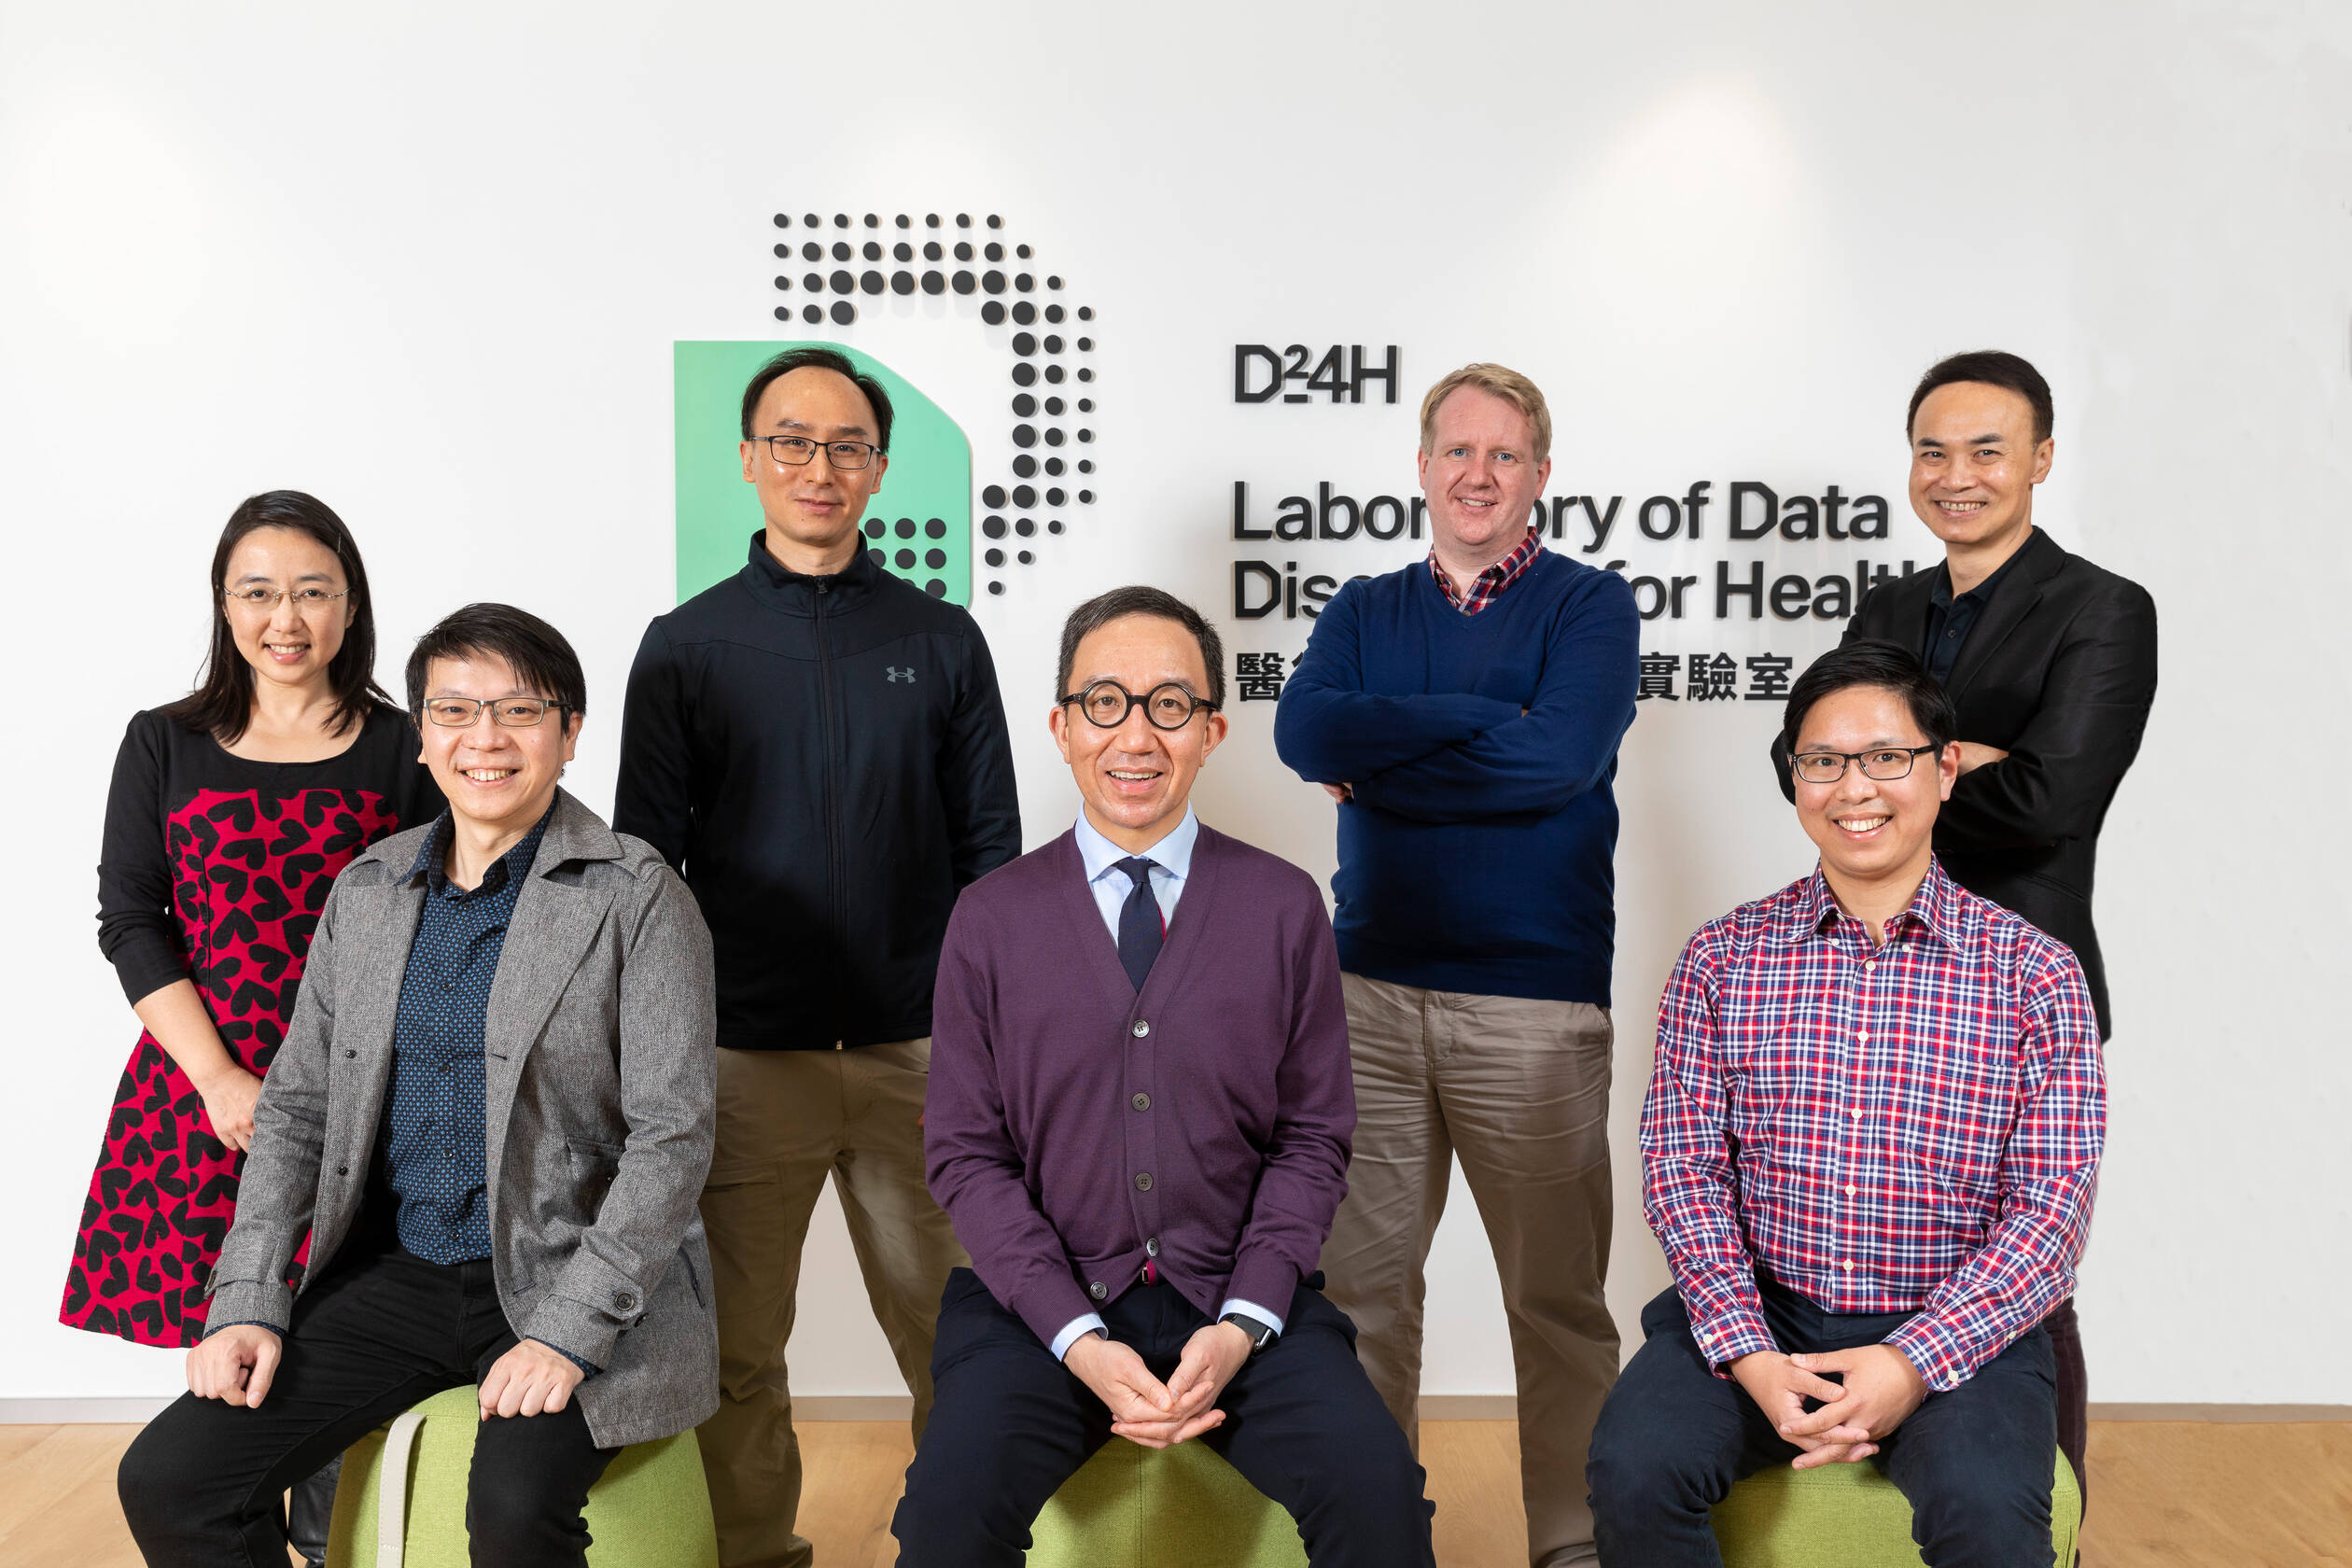 Laboratory of Data Discovery for Health